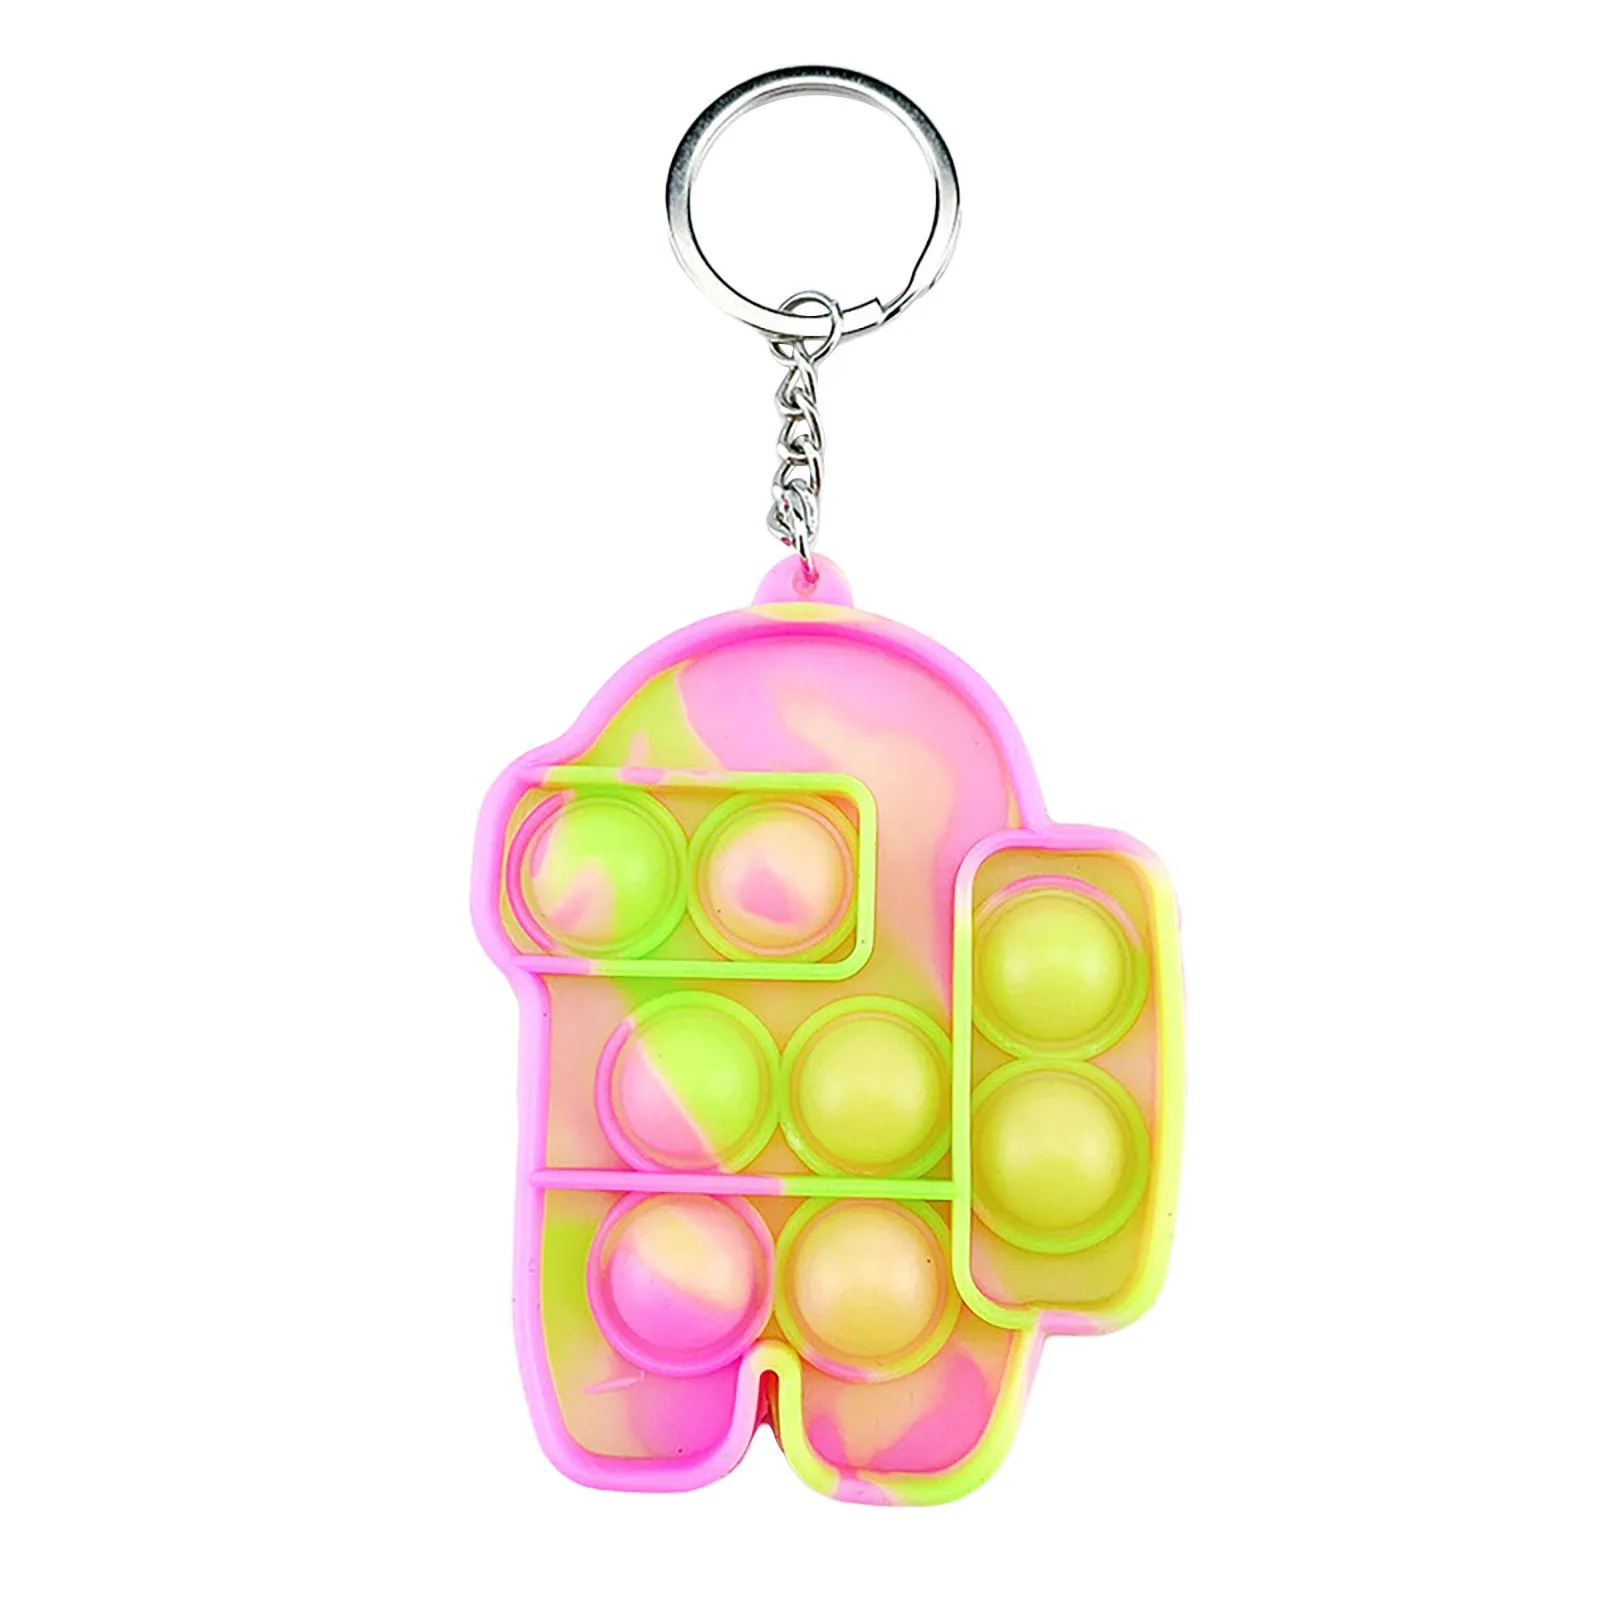 Mini Pops Fidget Toy Simple Dimple Its Anti Stress Relief Keychain Push Bubble Silicone Anxiety Sensory For Autism Adhd Chidlren stress ball brain